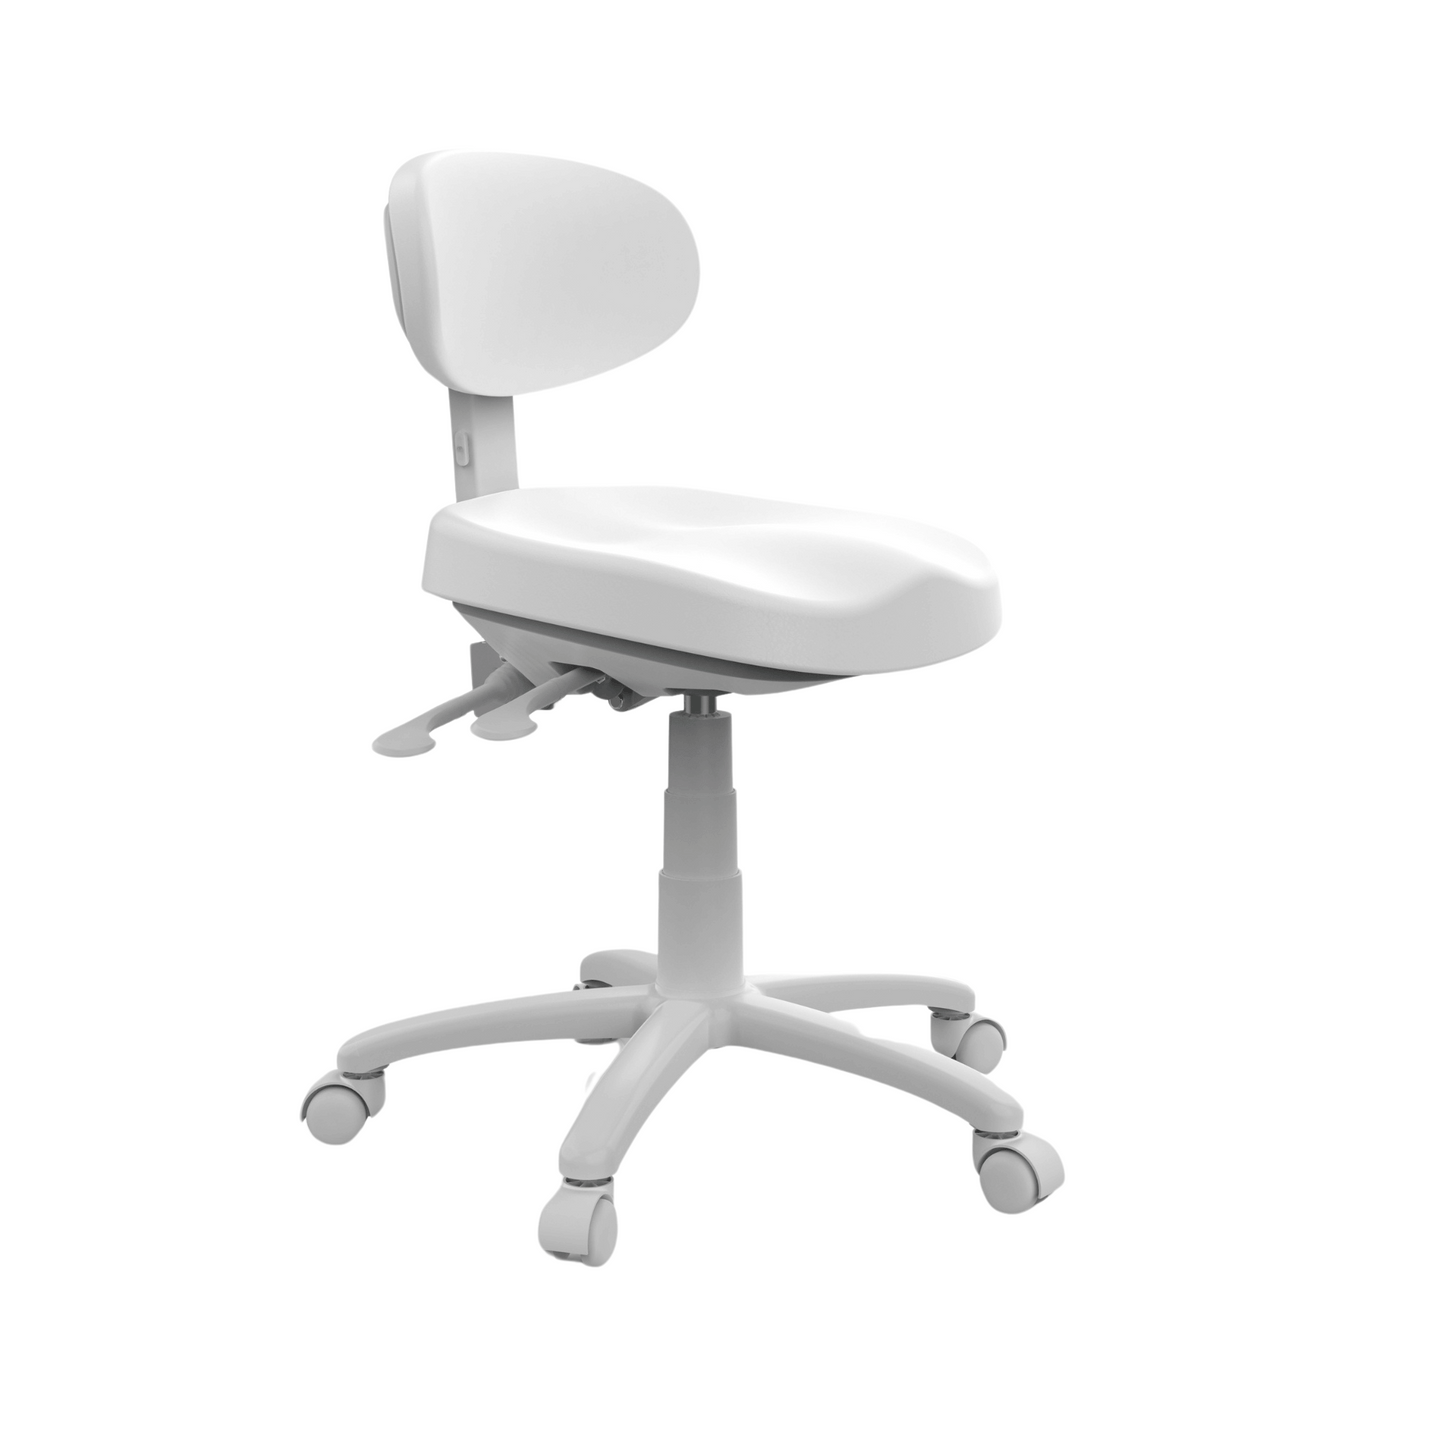 8C01 BEAUTICIAN STOOL & TROLLEY in White color